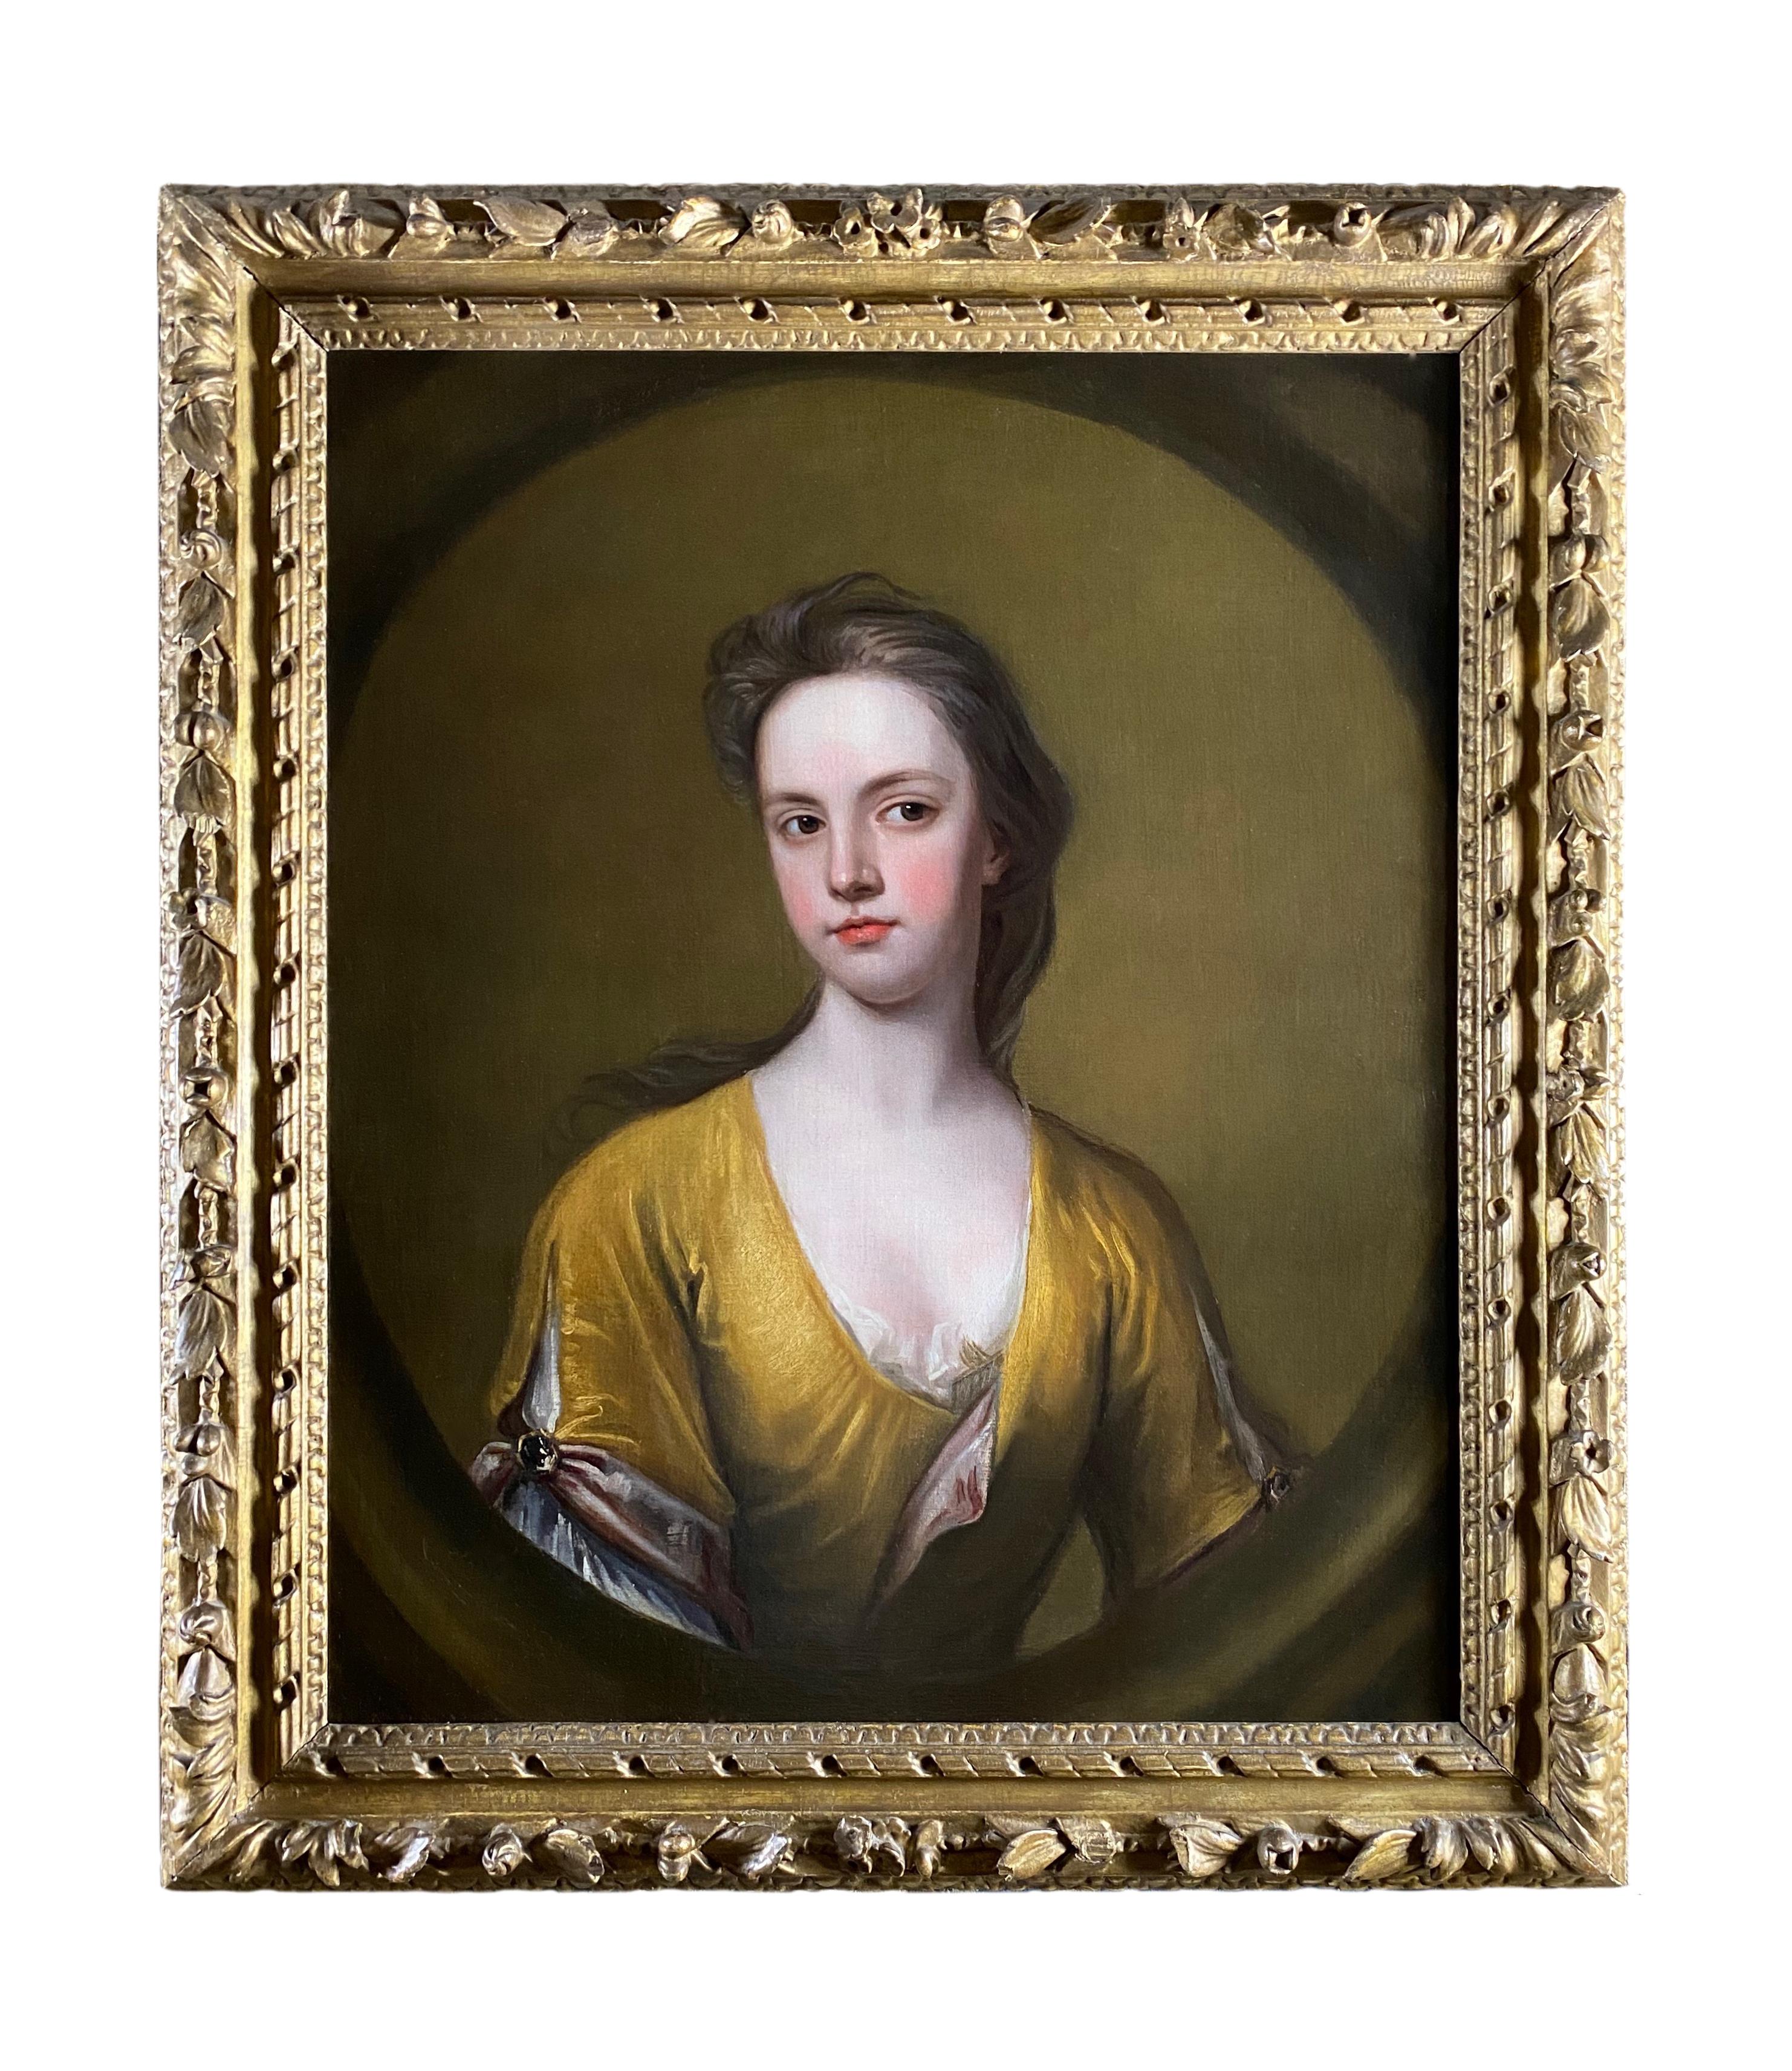 18th Century English Portrait of a Lady in a Yellow Dress. - Painting by Maria Verelst